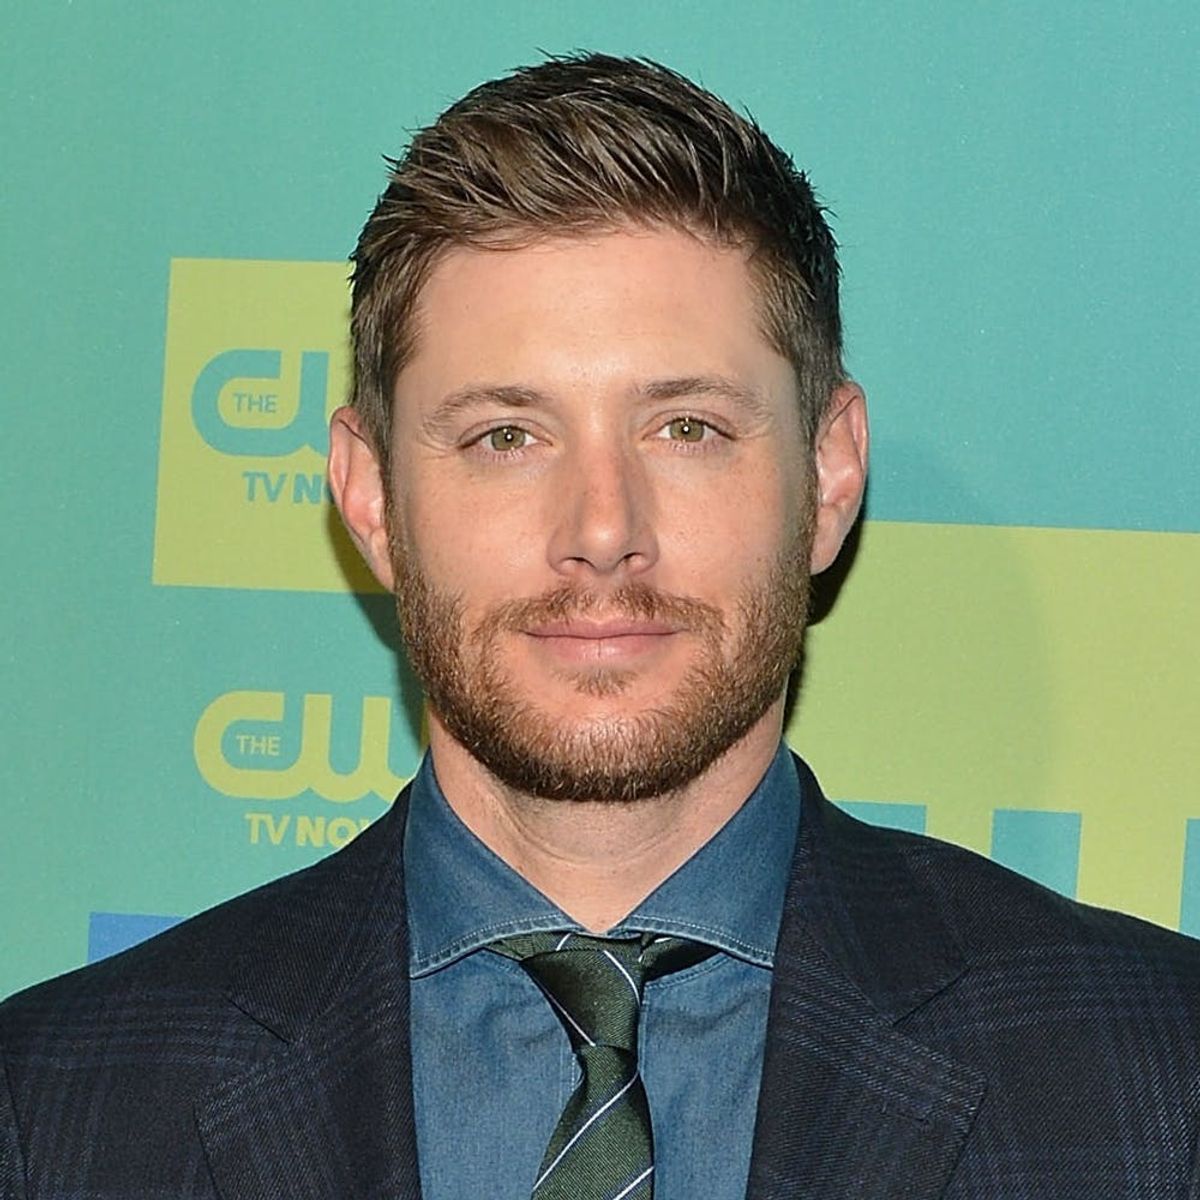 Supernatural’s Jensen Ackles Just Had a Super Sweet Moment With a Fan